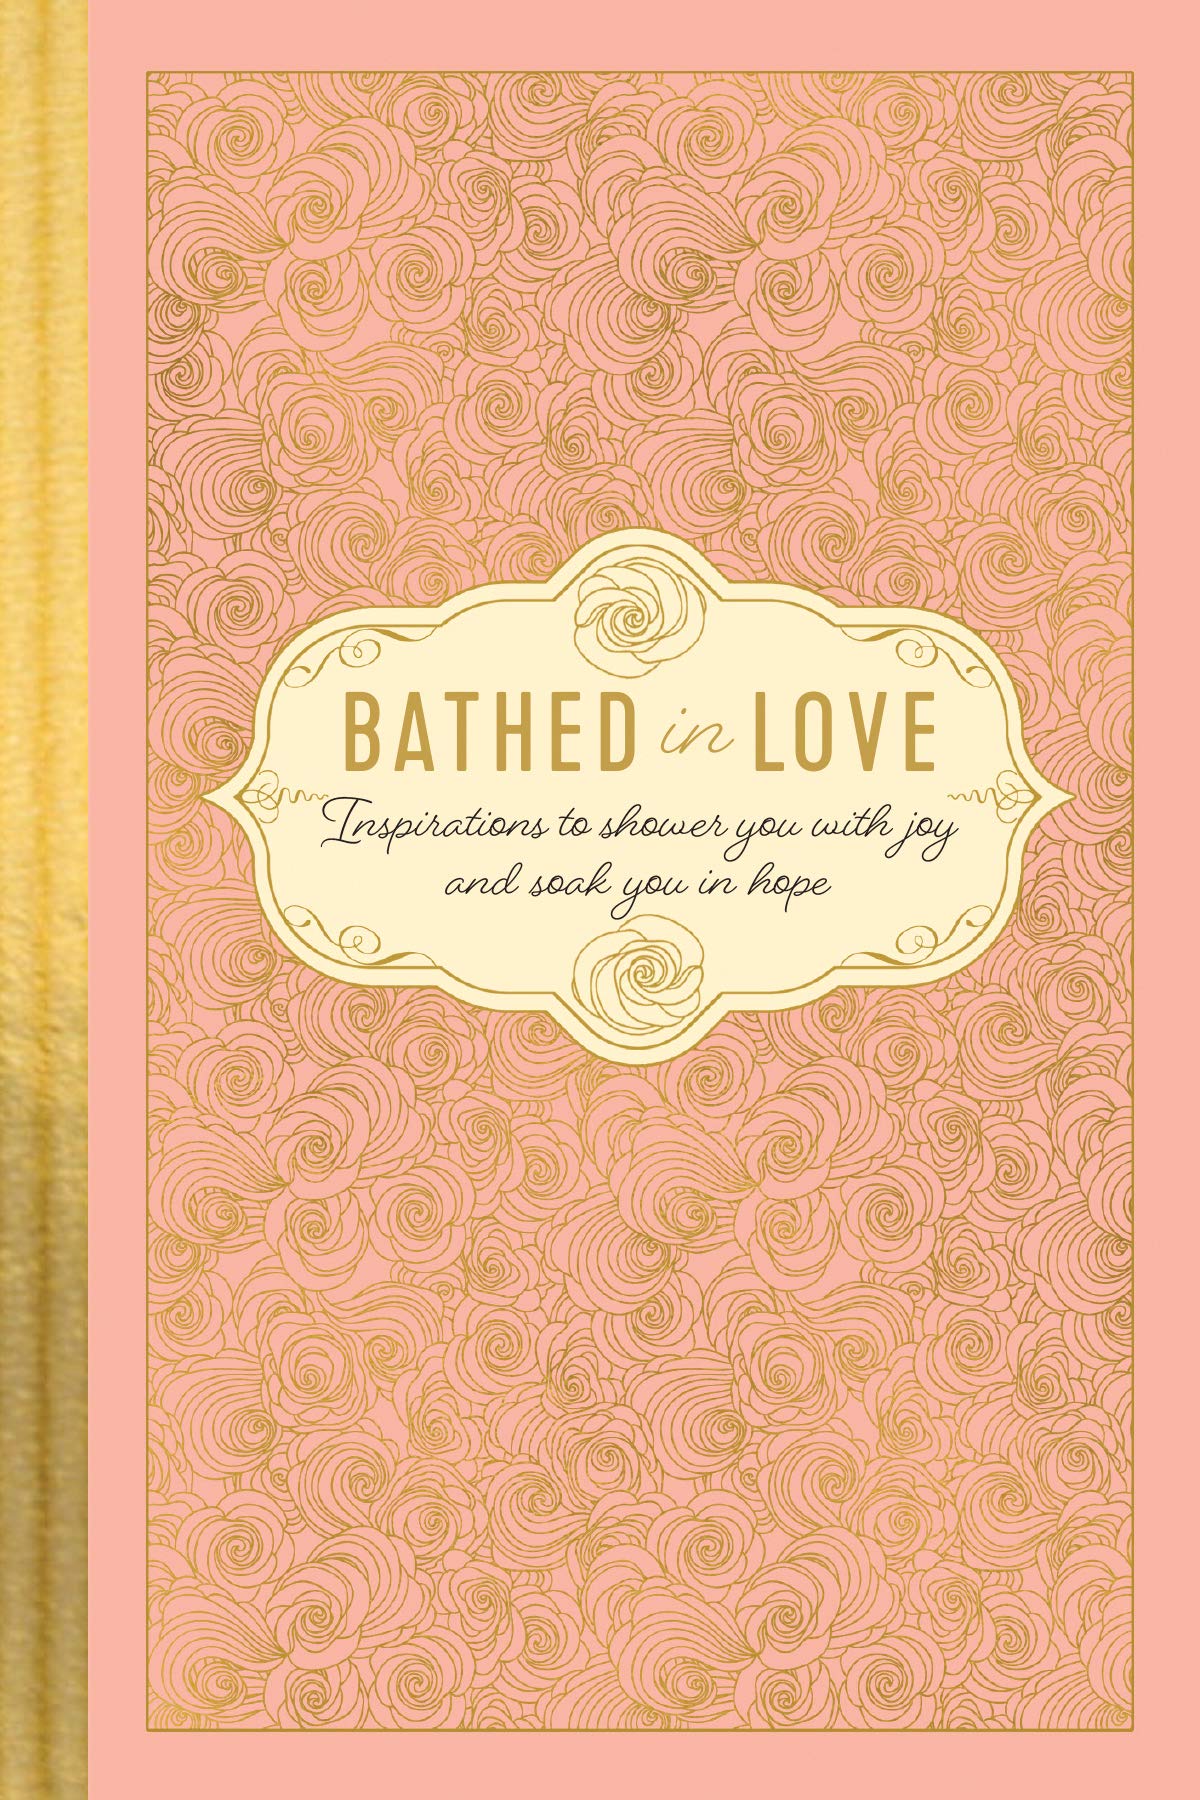 ROCKONLINE | Bathed in Love: Inspirations to Shower You with Joy and Soak You in Hope (hardcover) | Devotional | Christian Living | Prayer | Promises | Bible Verse | Gary Chapman | New Creation Church | NCC | Joseph Prince | ROCK Bookshop | ROCK Bookstore | Star Vista | Free delivery for Singapore Orders above $50.